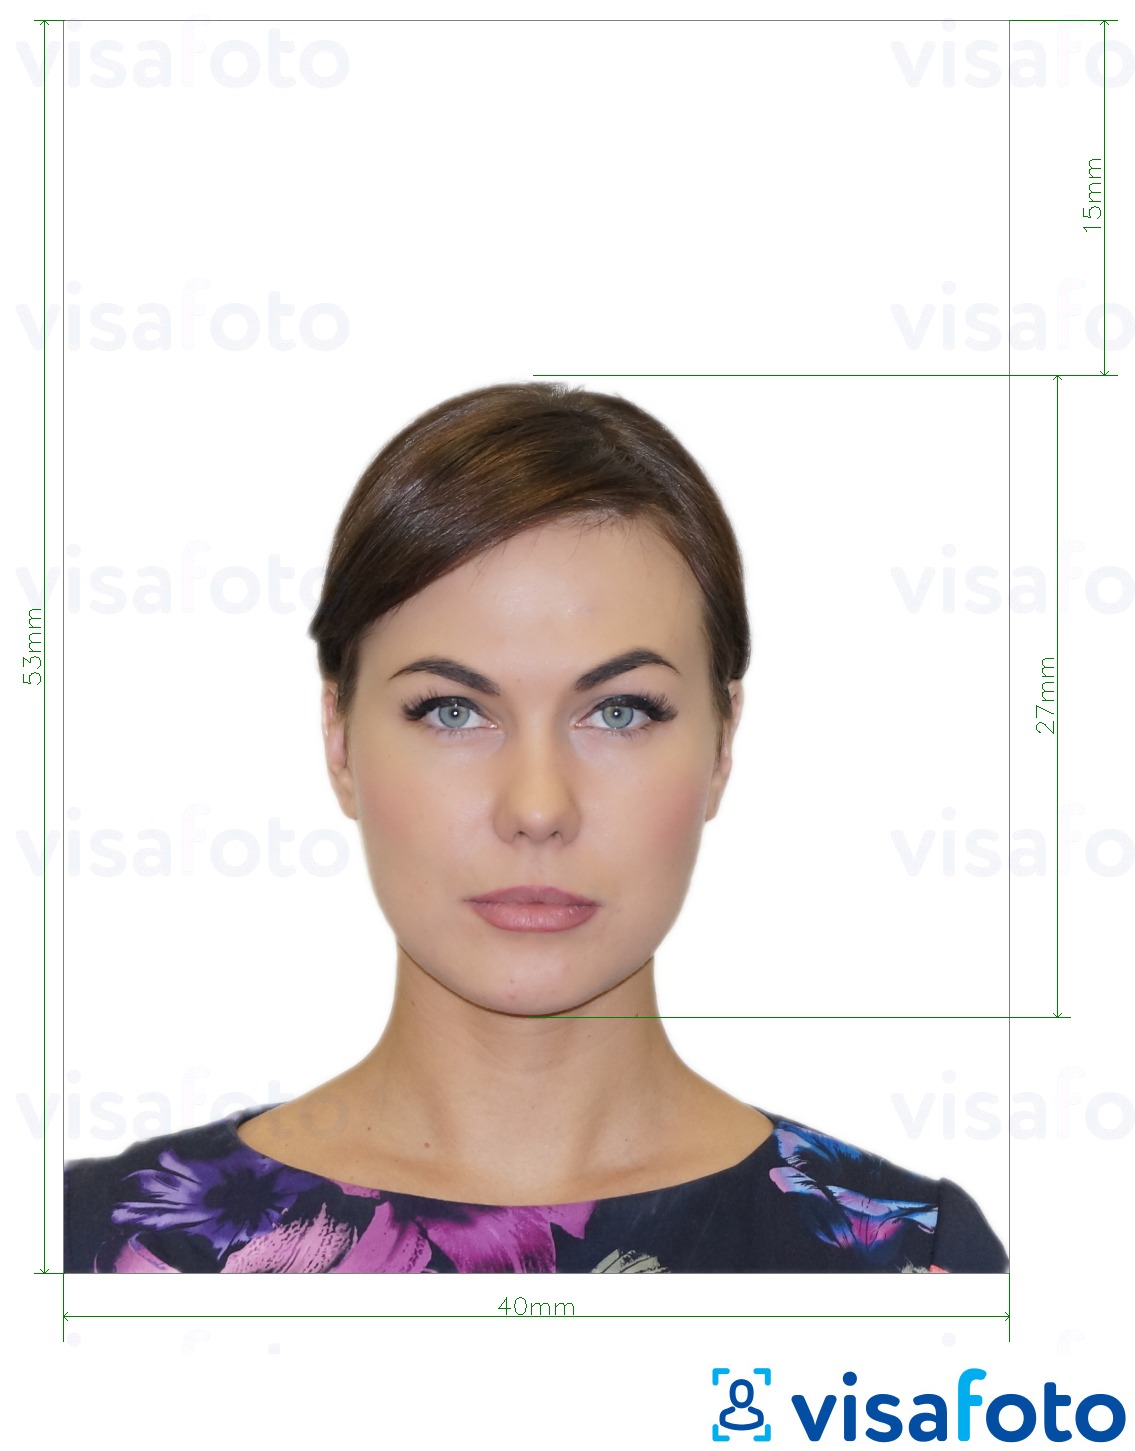 Example of photo for Spain Passport 40x53 mm with exact size specification